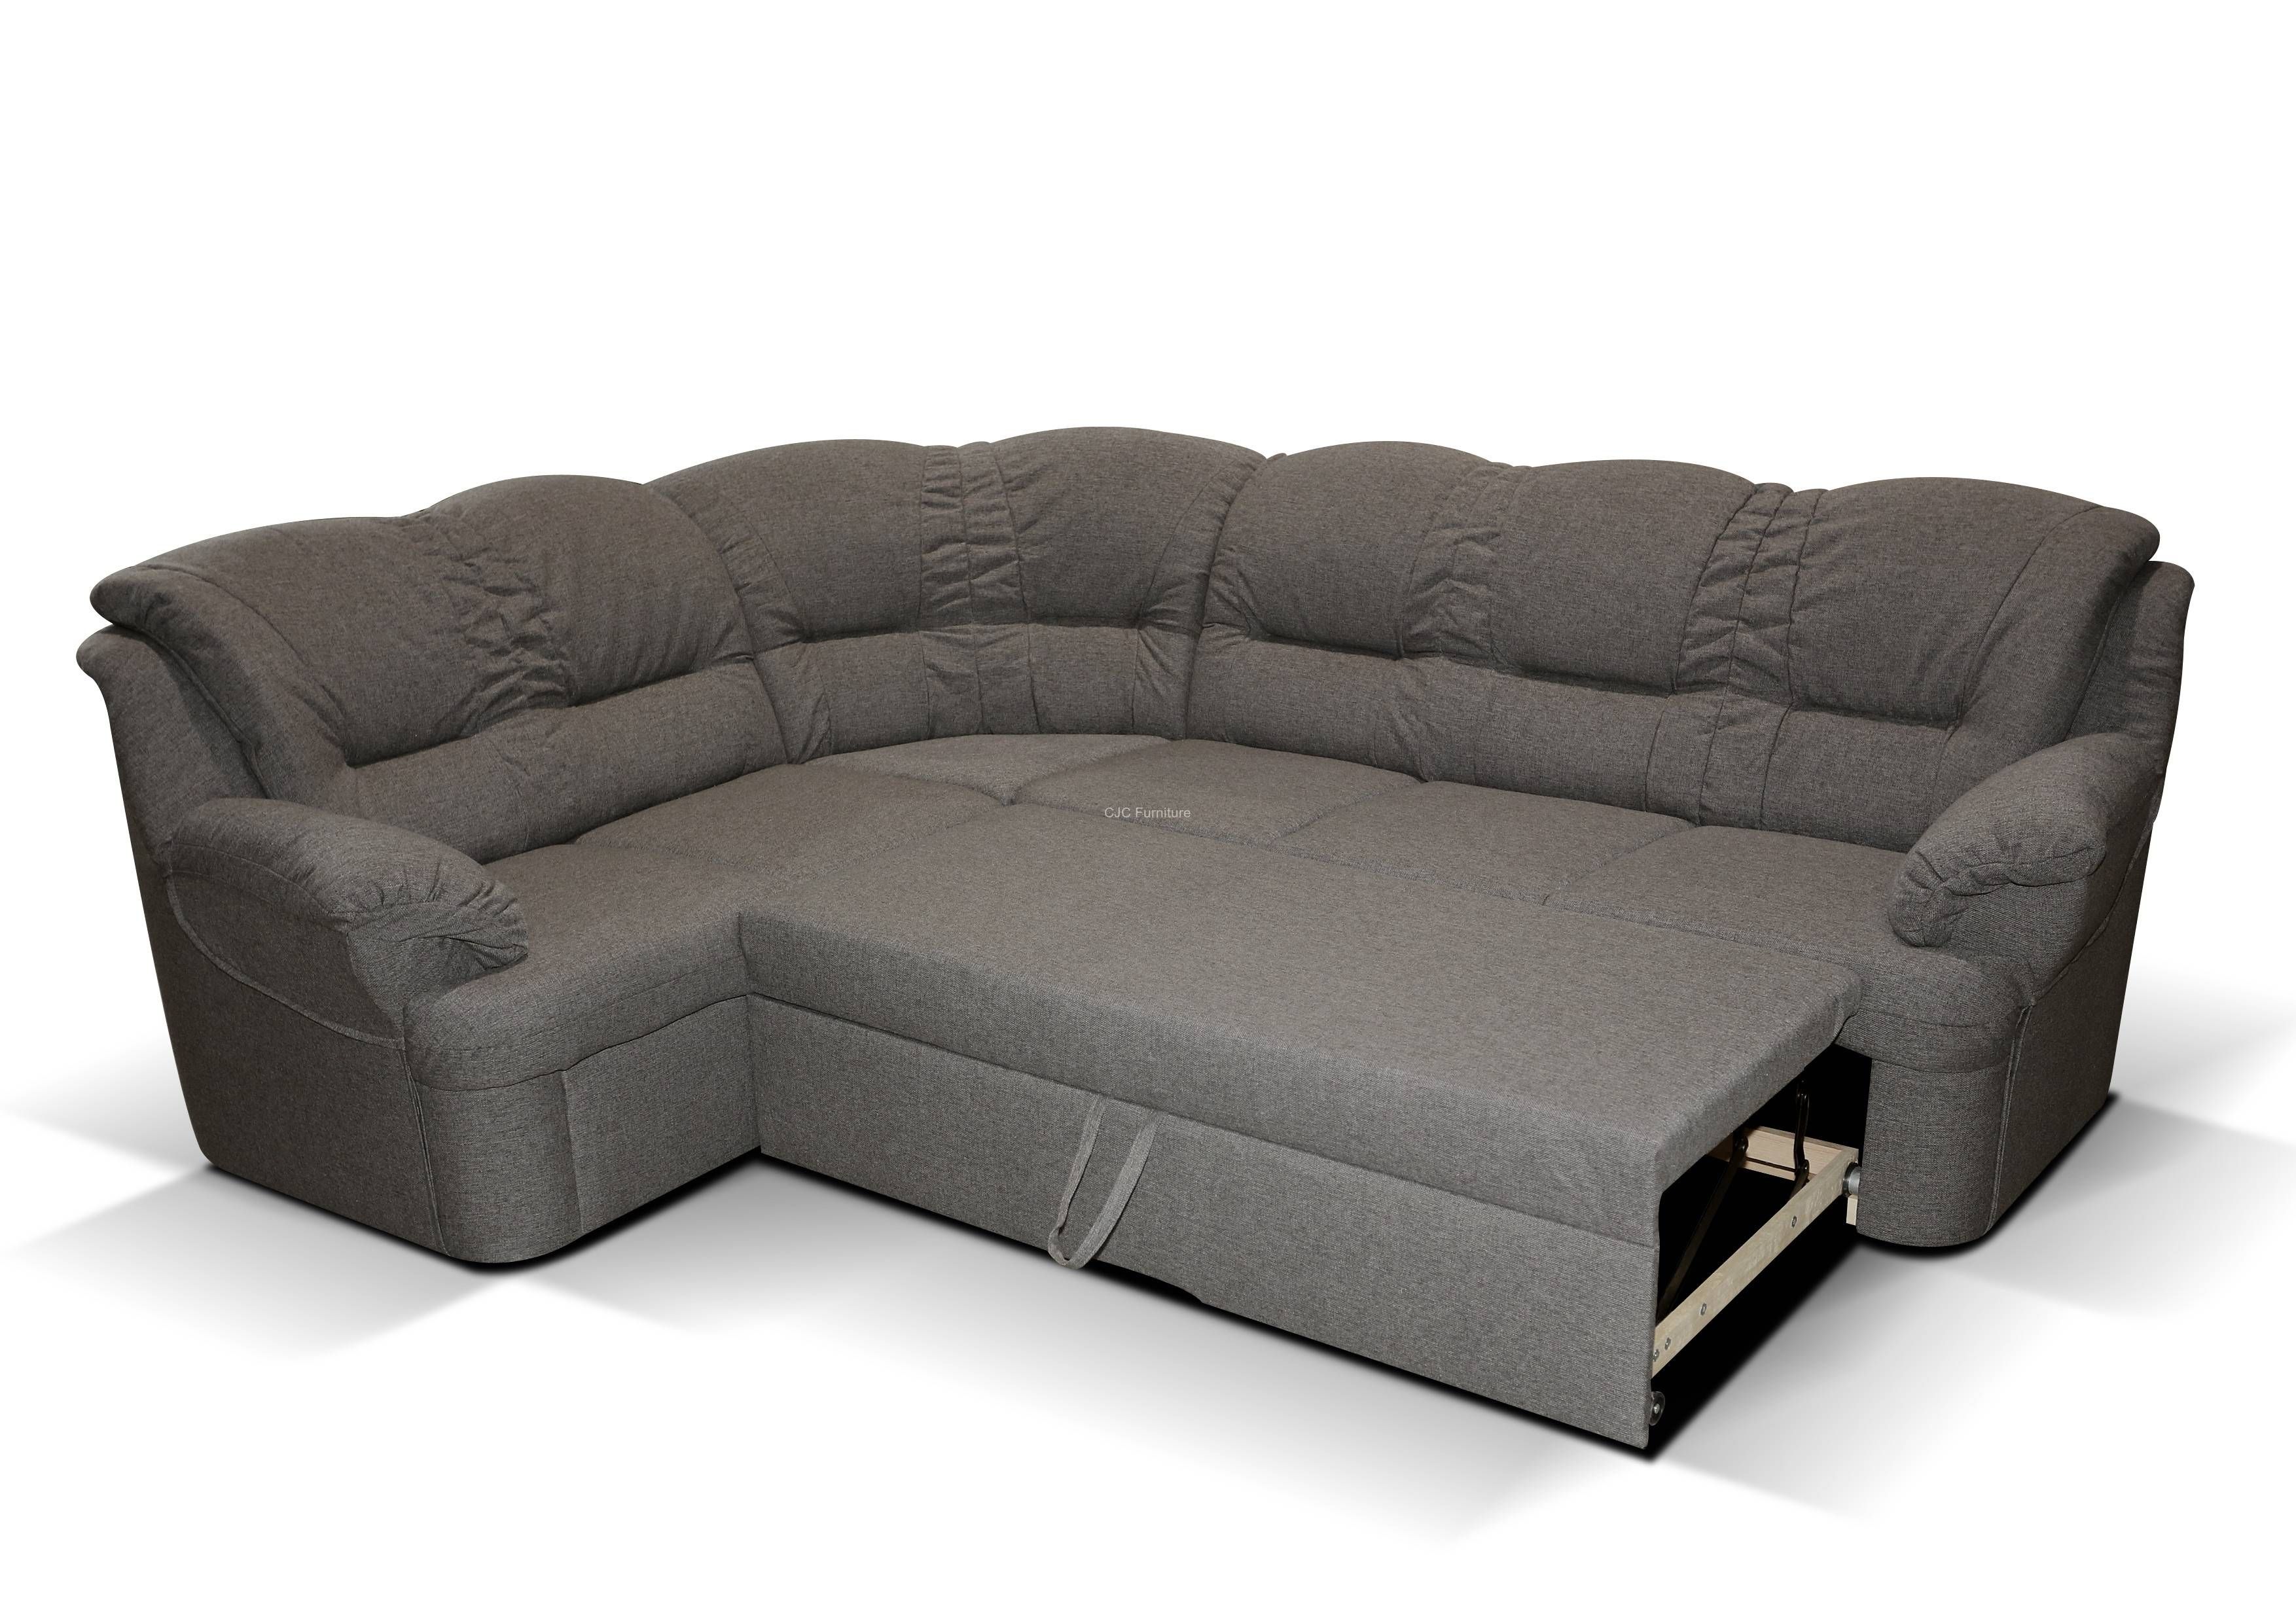 Sofas Center 30 Staggering Discount Sofa Bed Photo Design Pertaining To Corner Sofa Bed Sale 